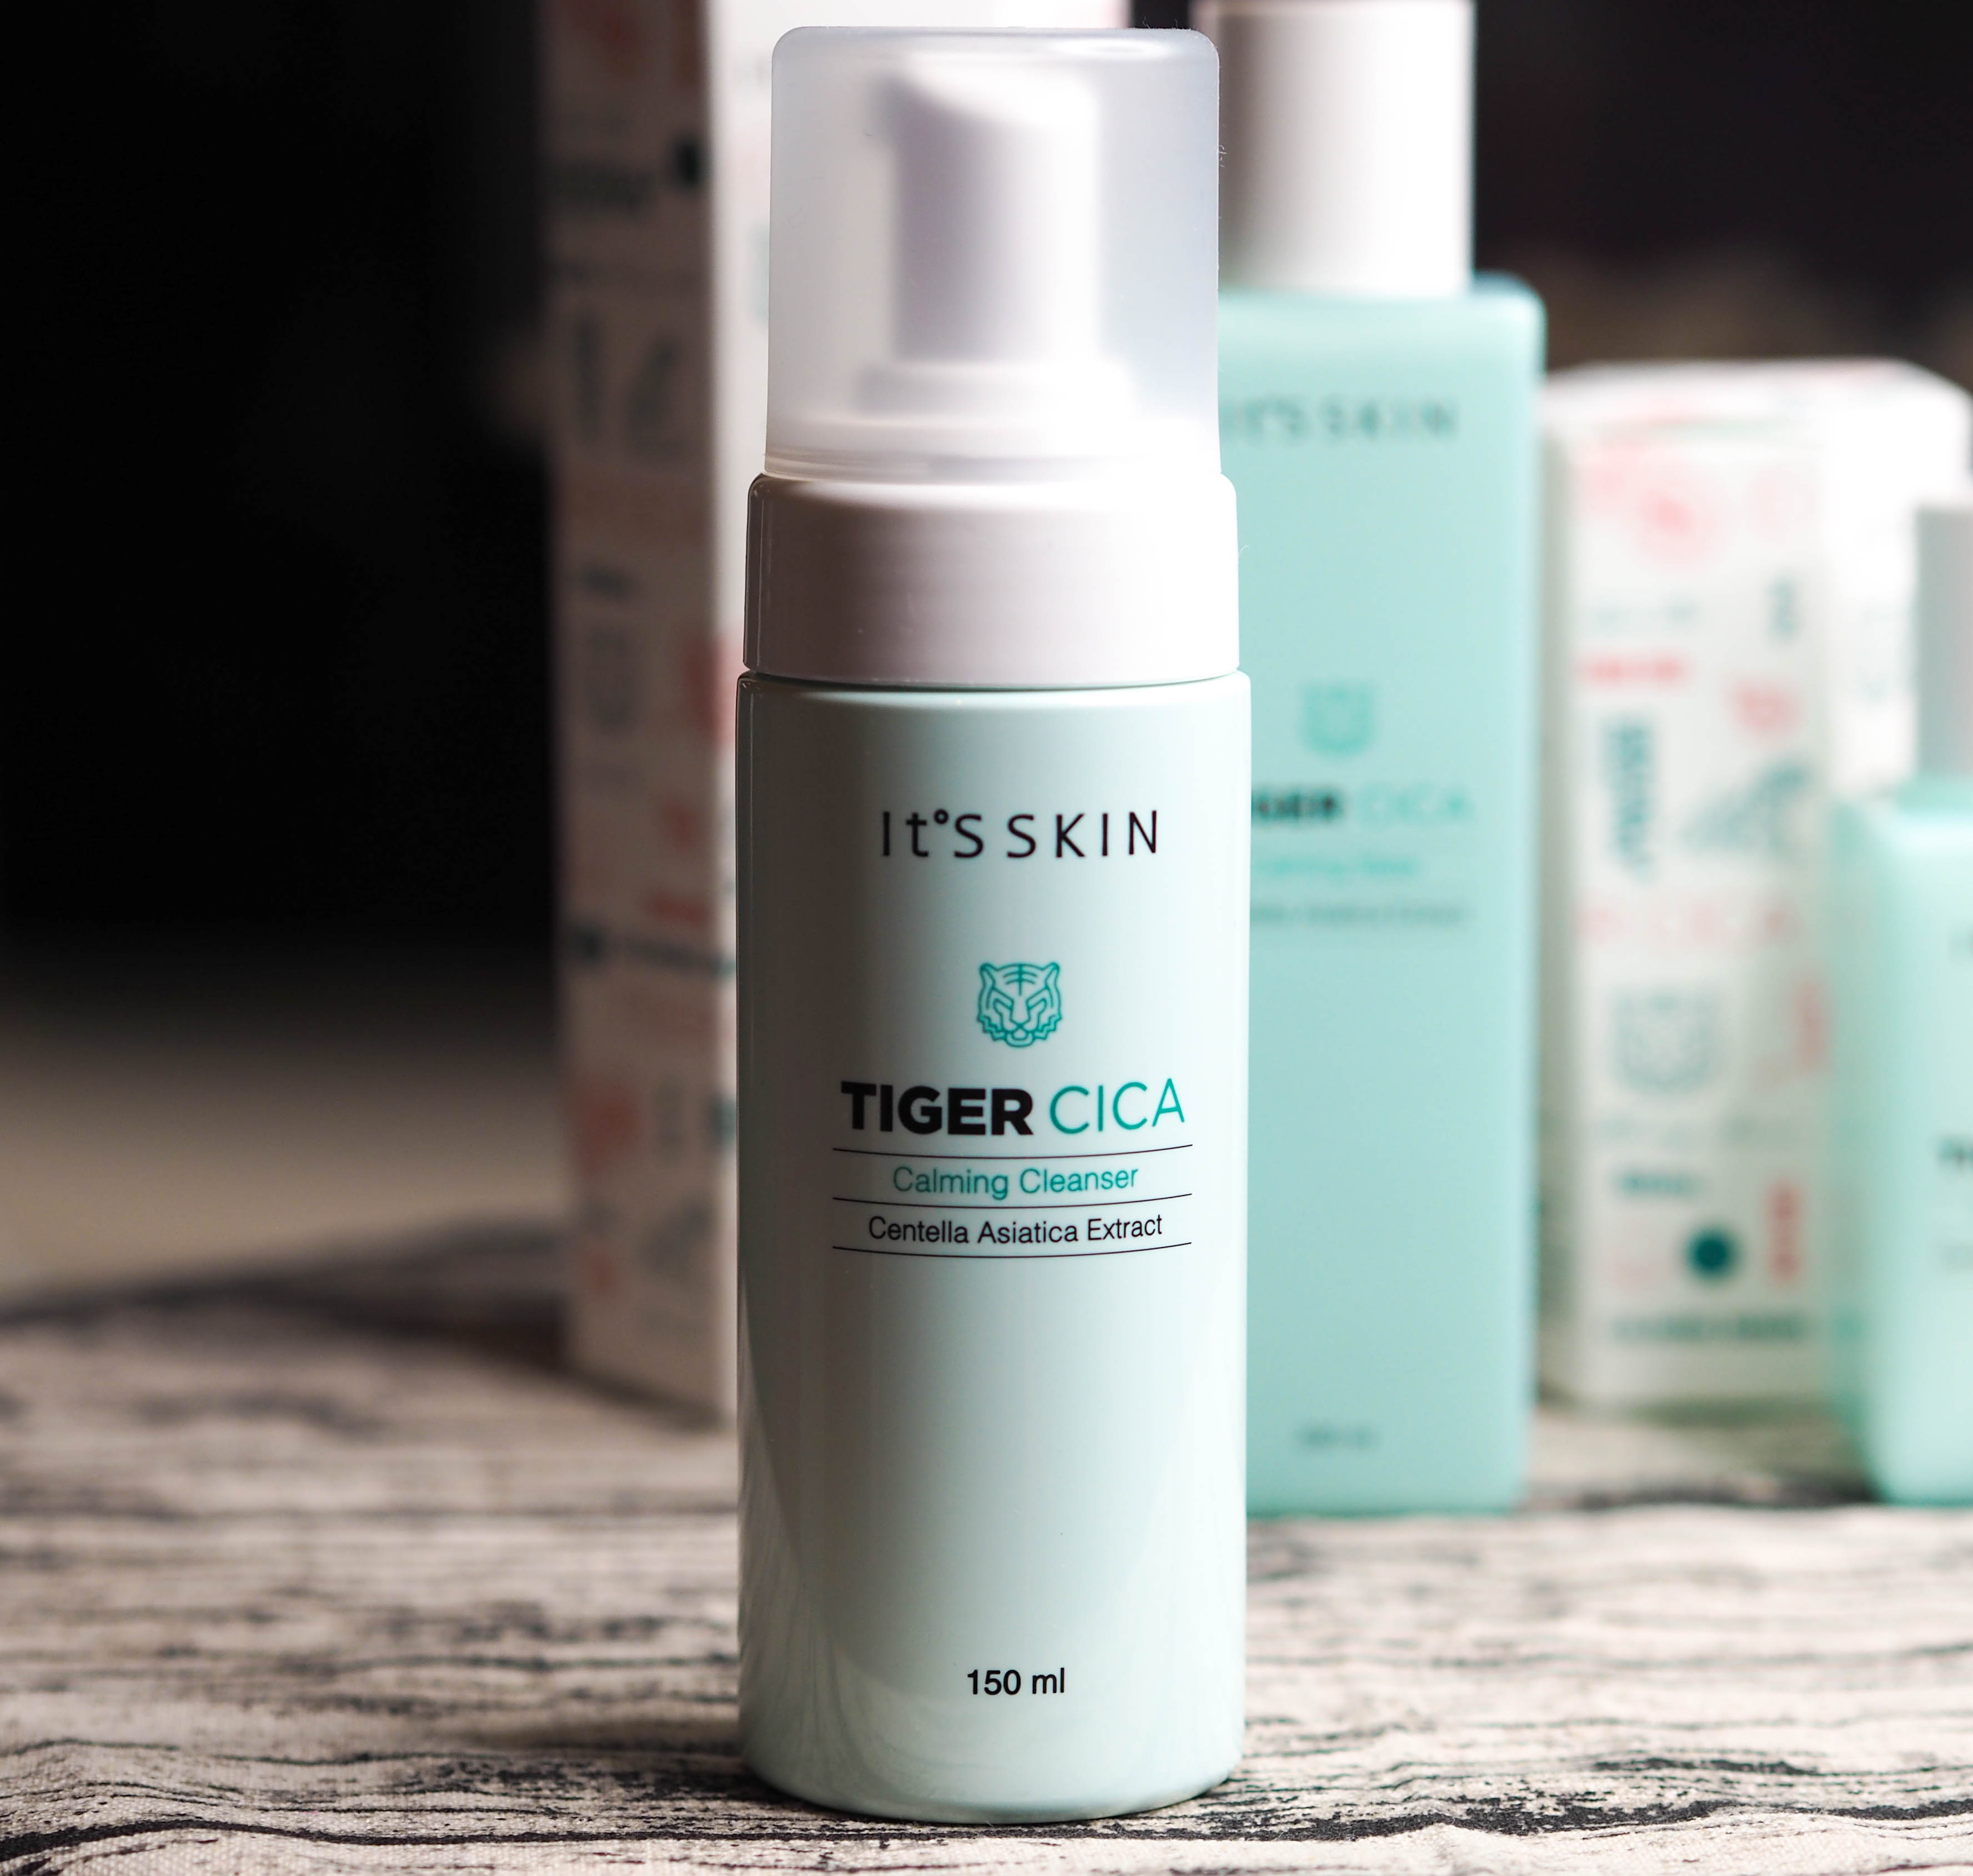 It's Skin Tiger Cica Calming Cleanser Revie